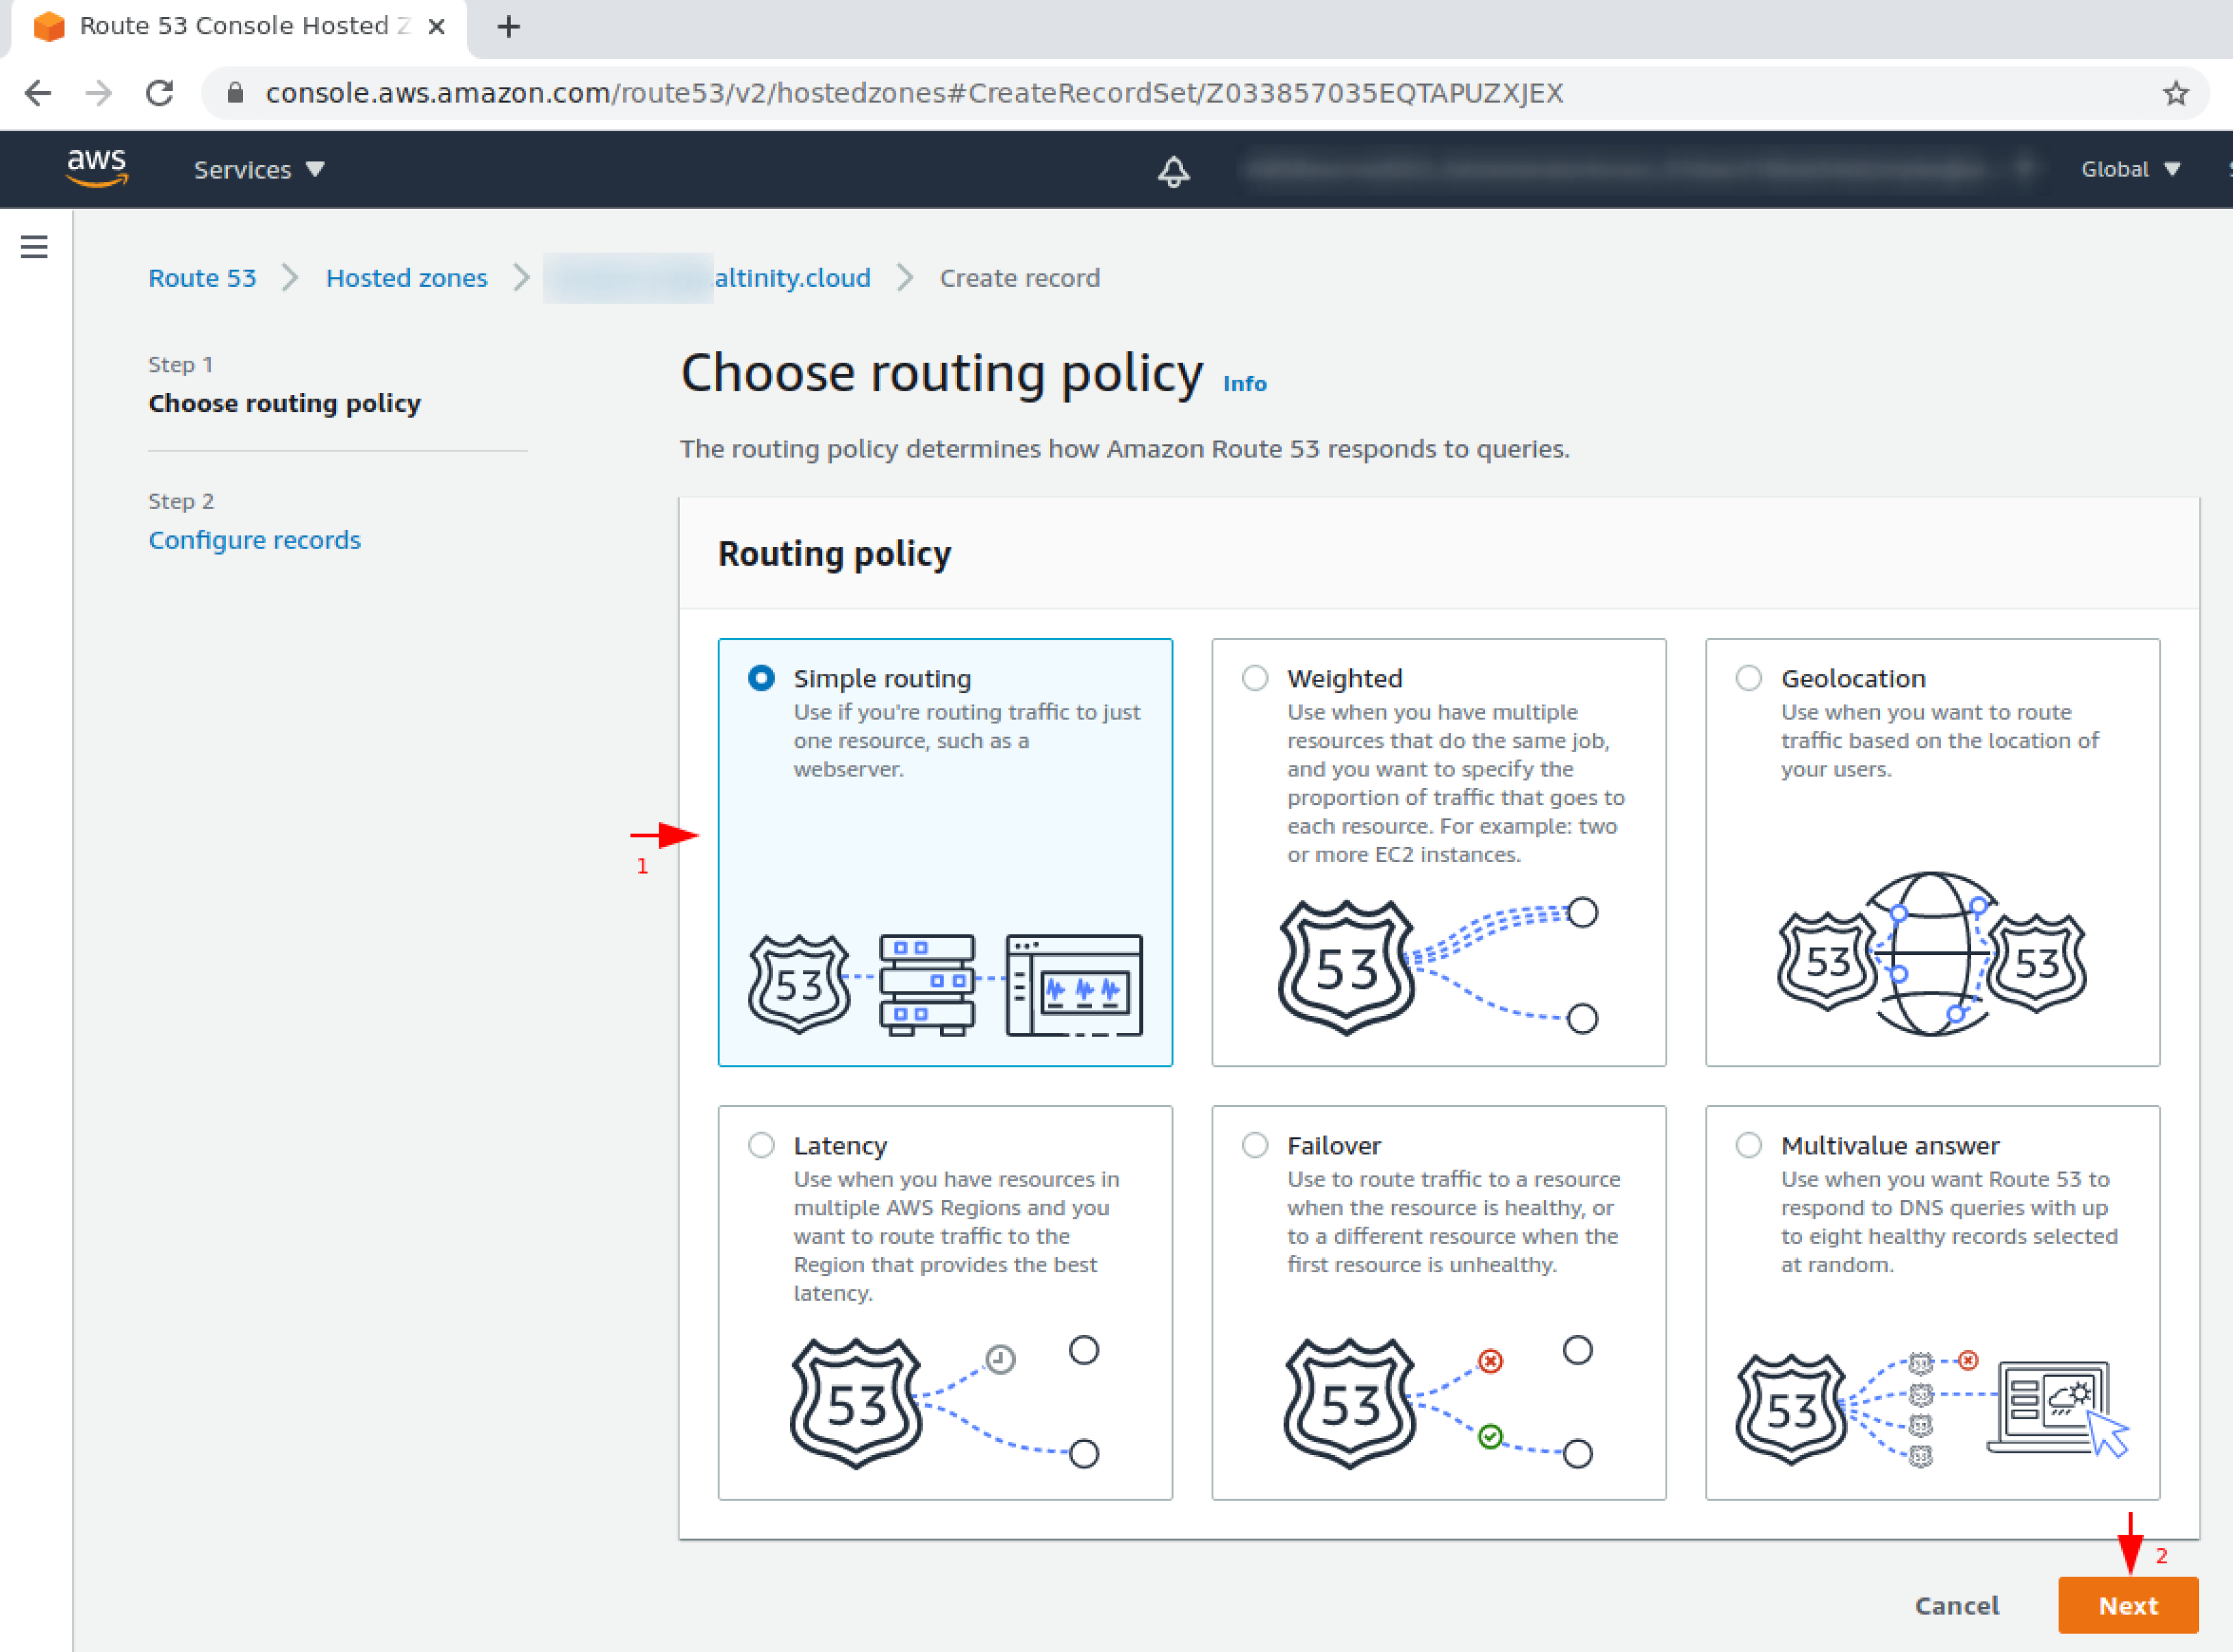 Choose routing policy